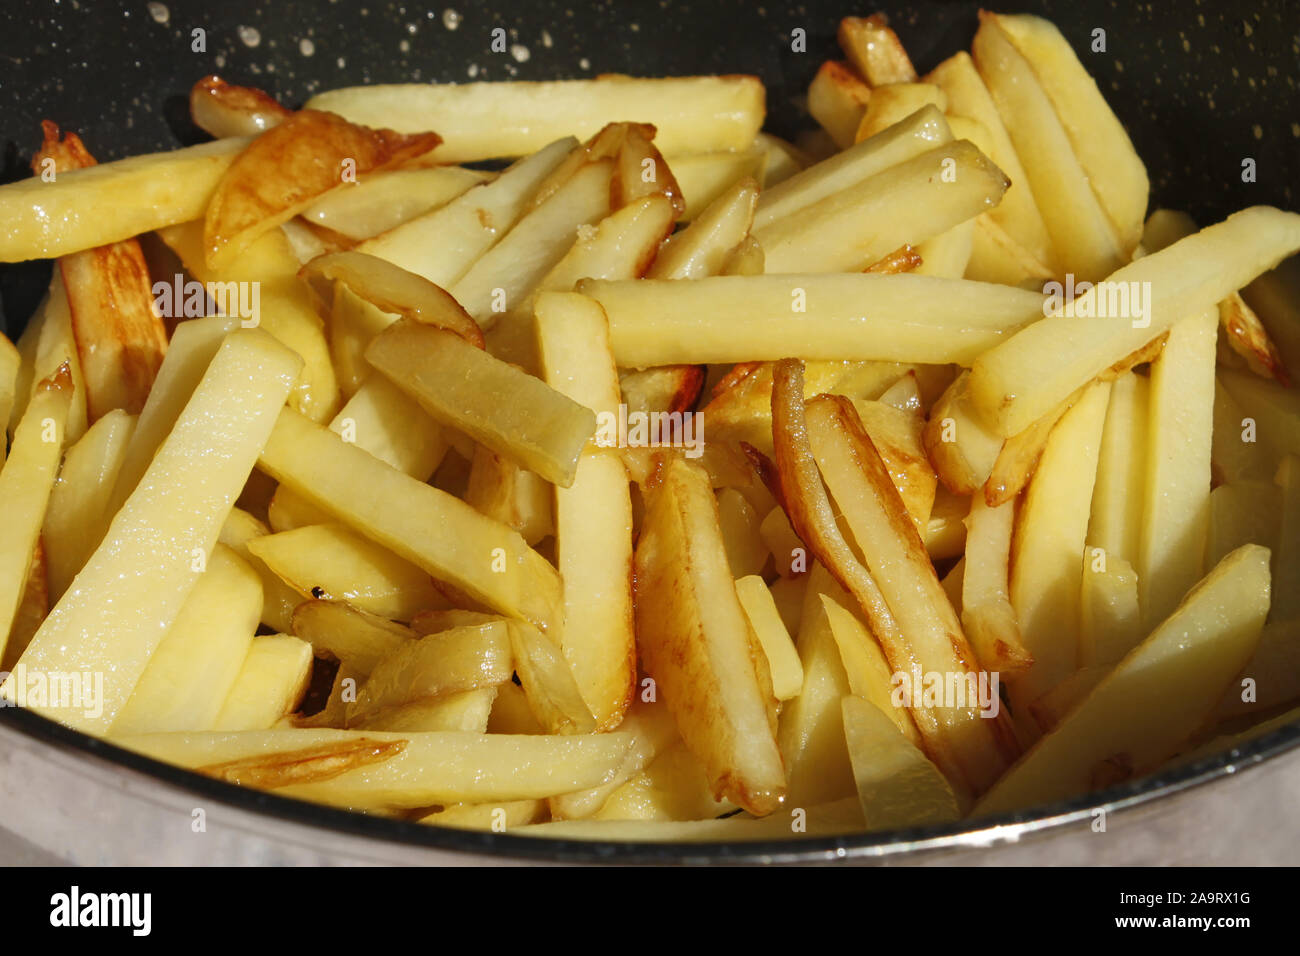 Roasted potato chips in a frying pan close-up, in bright sunlight Stock Photo